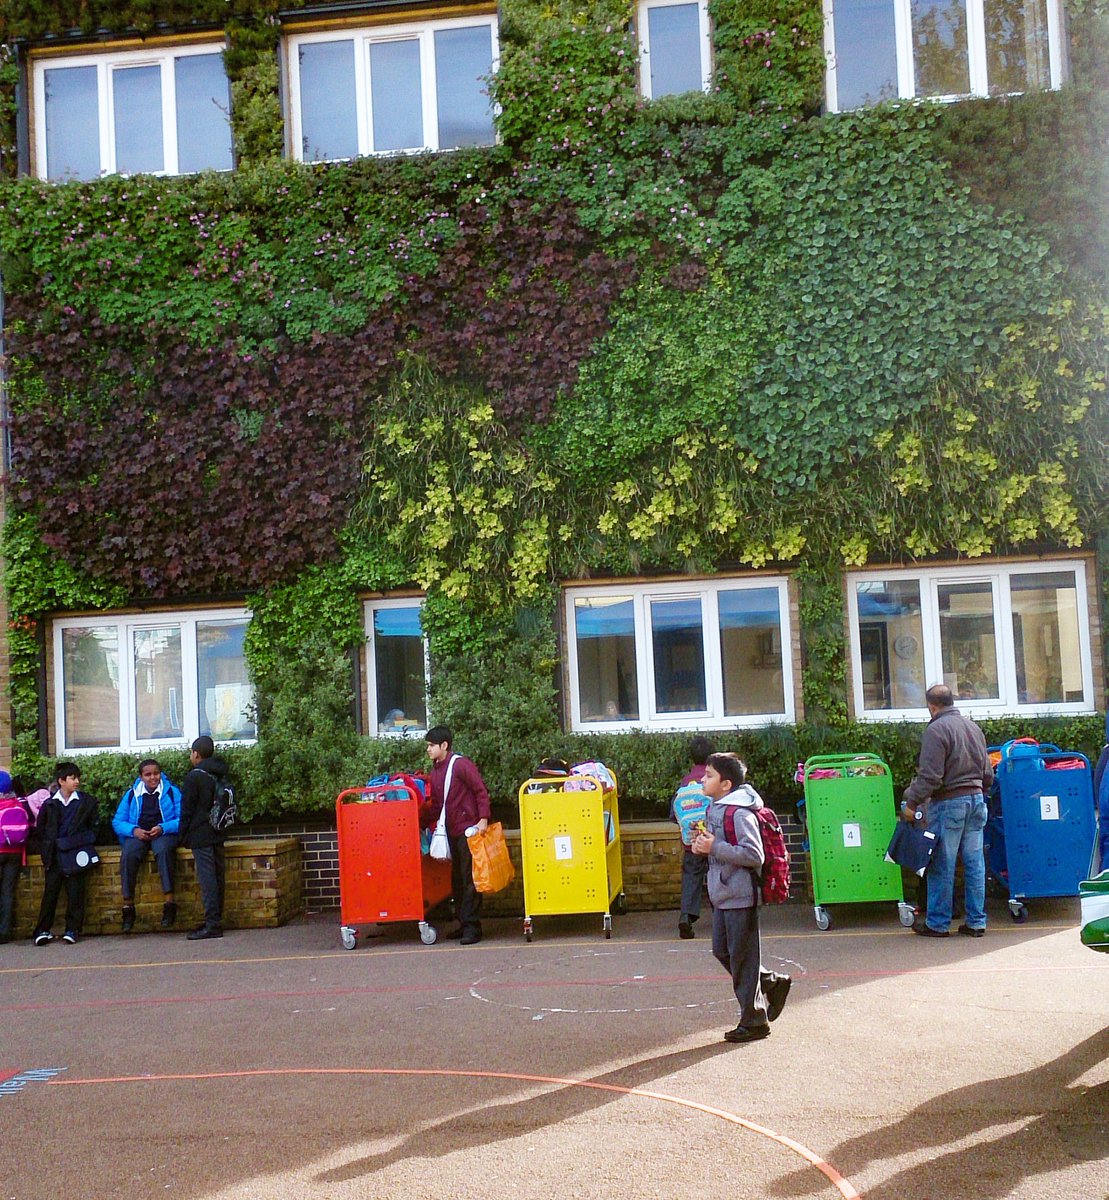 No space for a #landscaped #garden?  
How about a living vertical garden?  
Living walls require less space but still offer the benefits of increasing #biodiversity.  When space is so scarce in the city, #livingwalls become an #innovative way to #bringnatureback!
#greenwalls